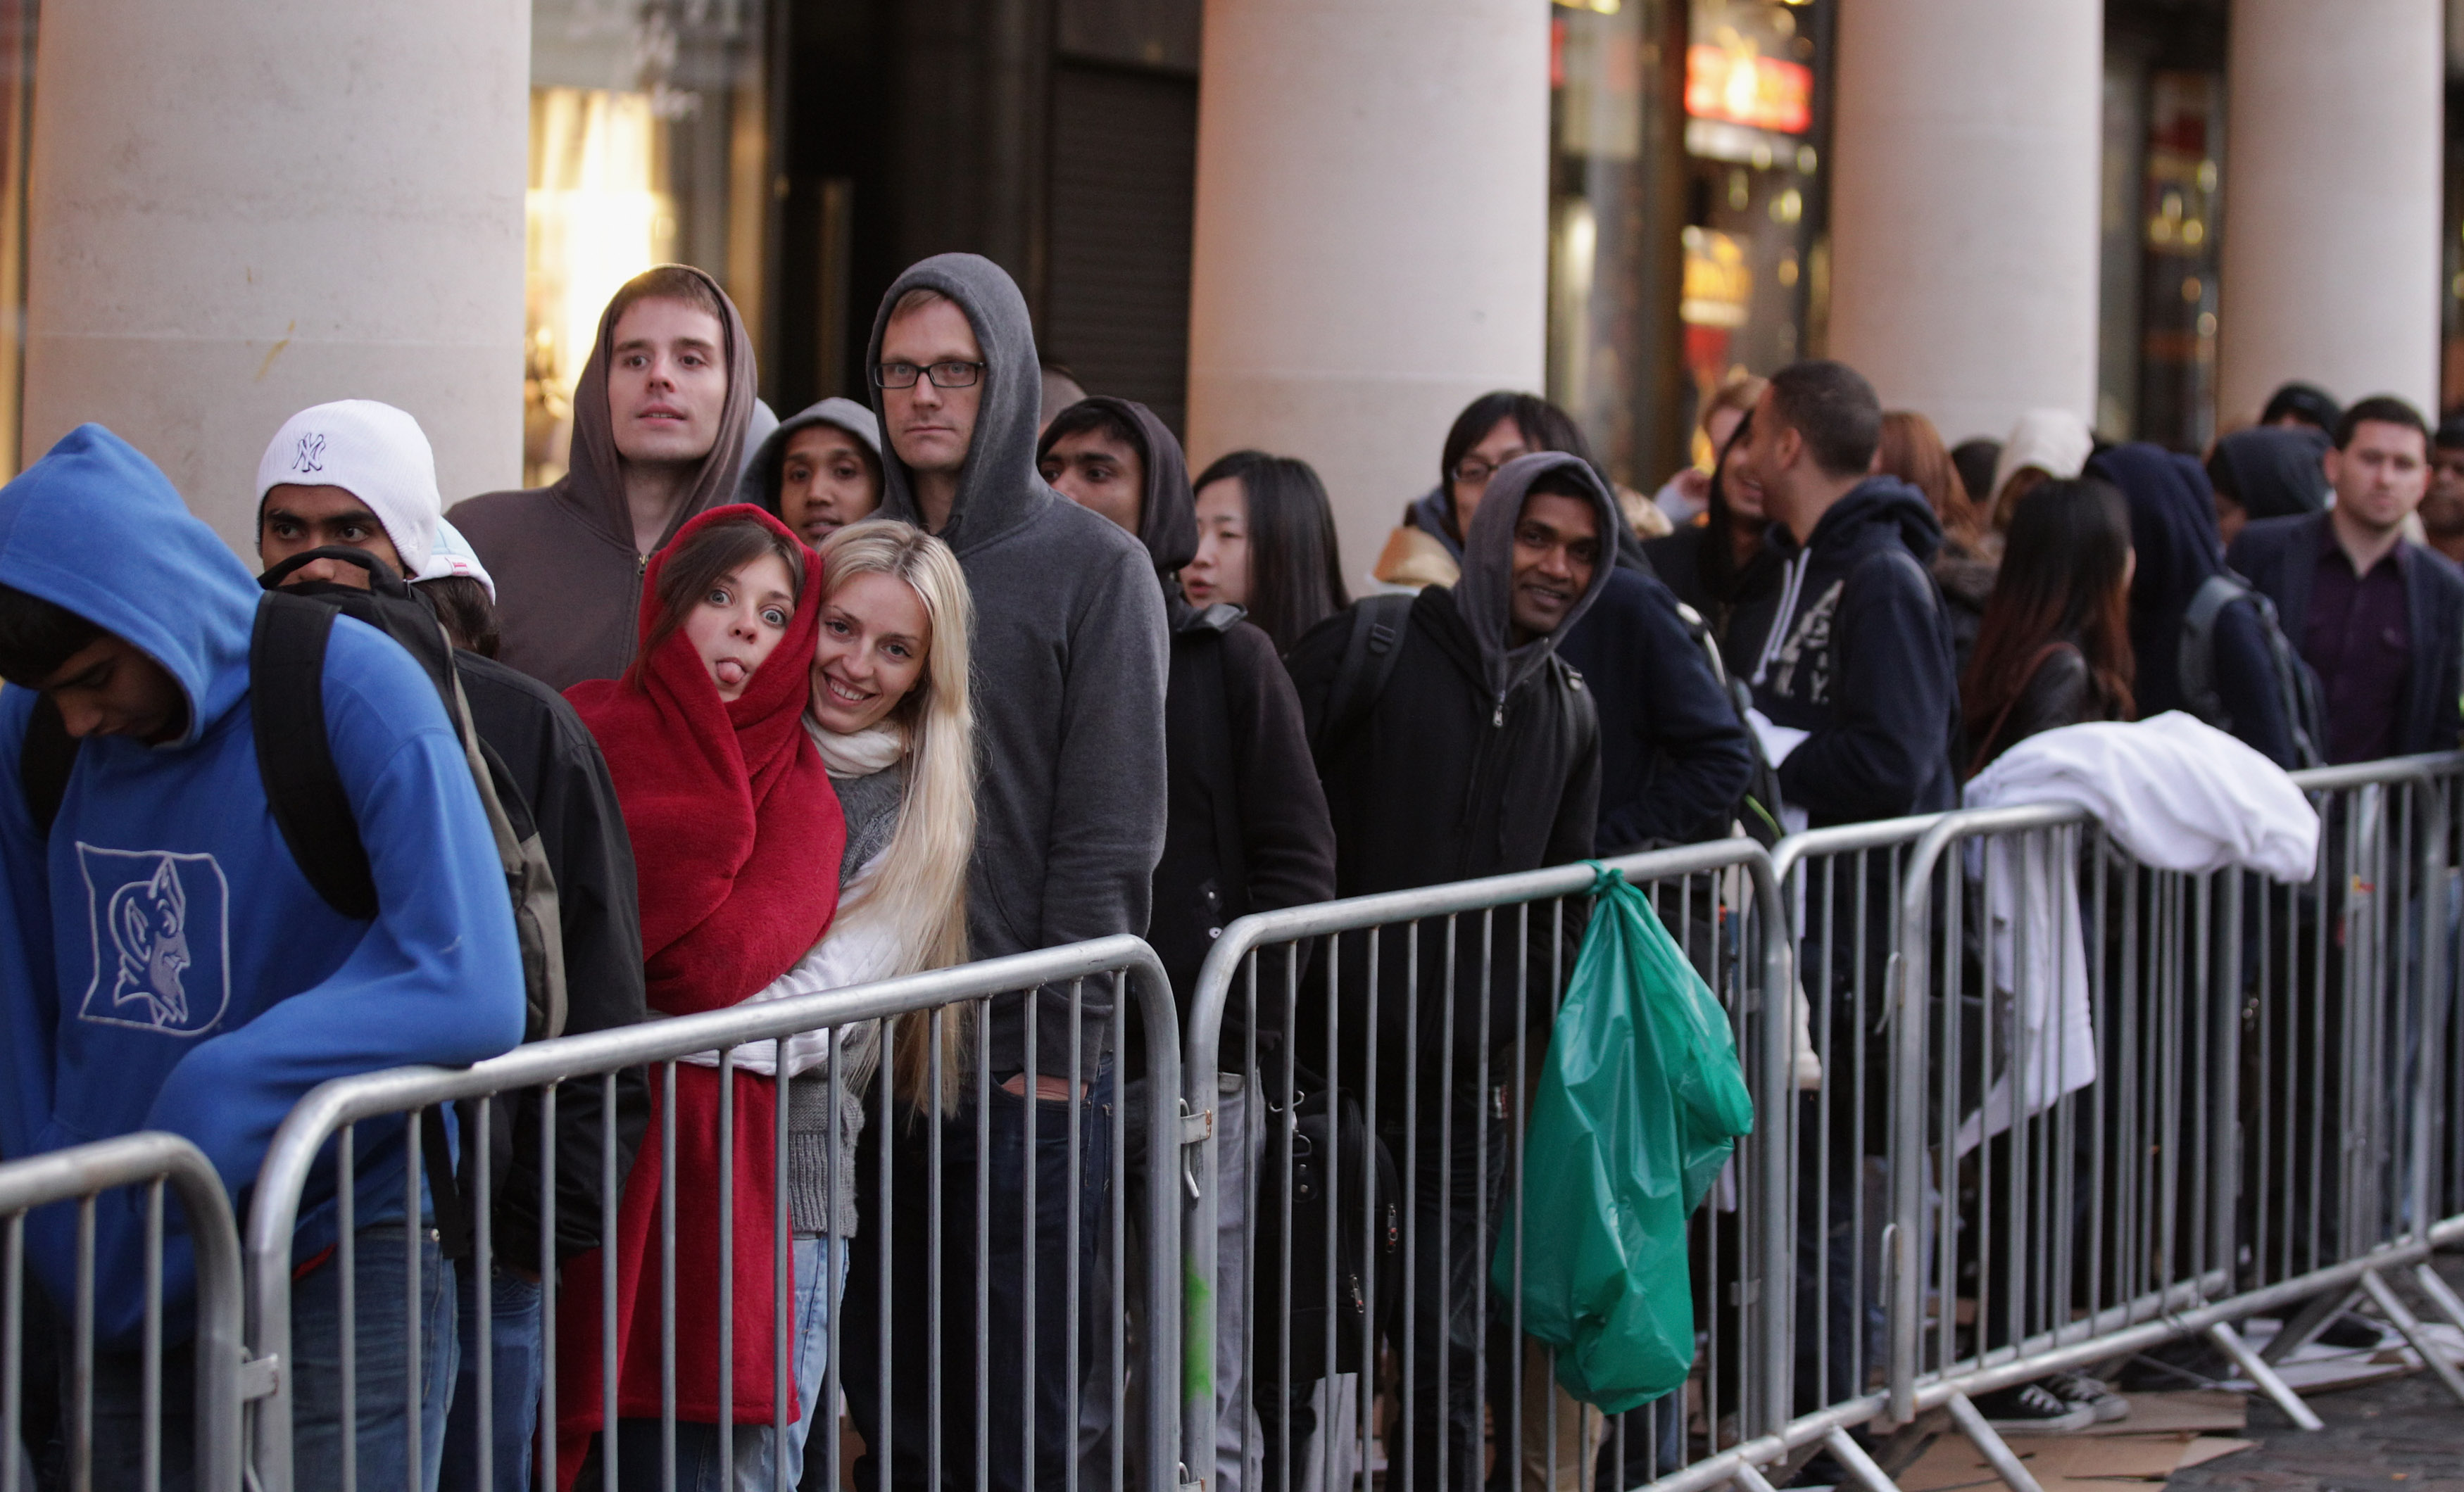 Apple doesn’t want customers camping in line for new products